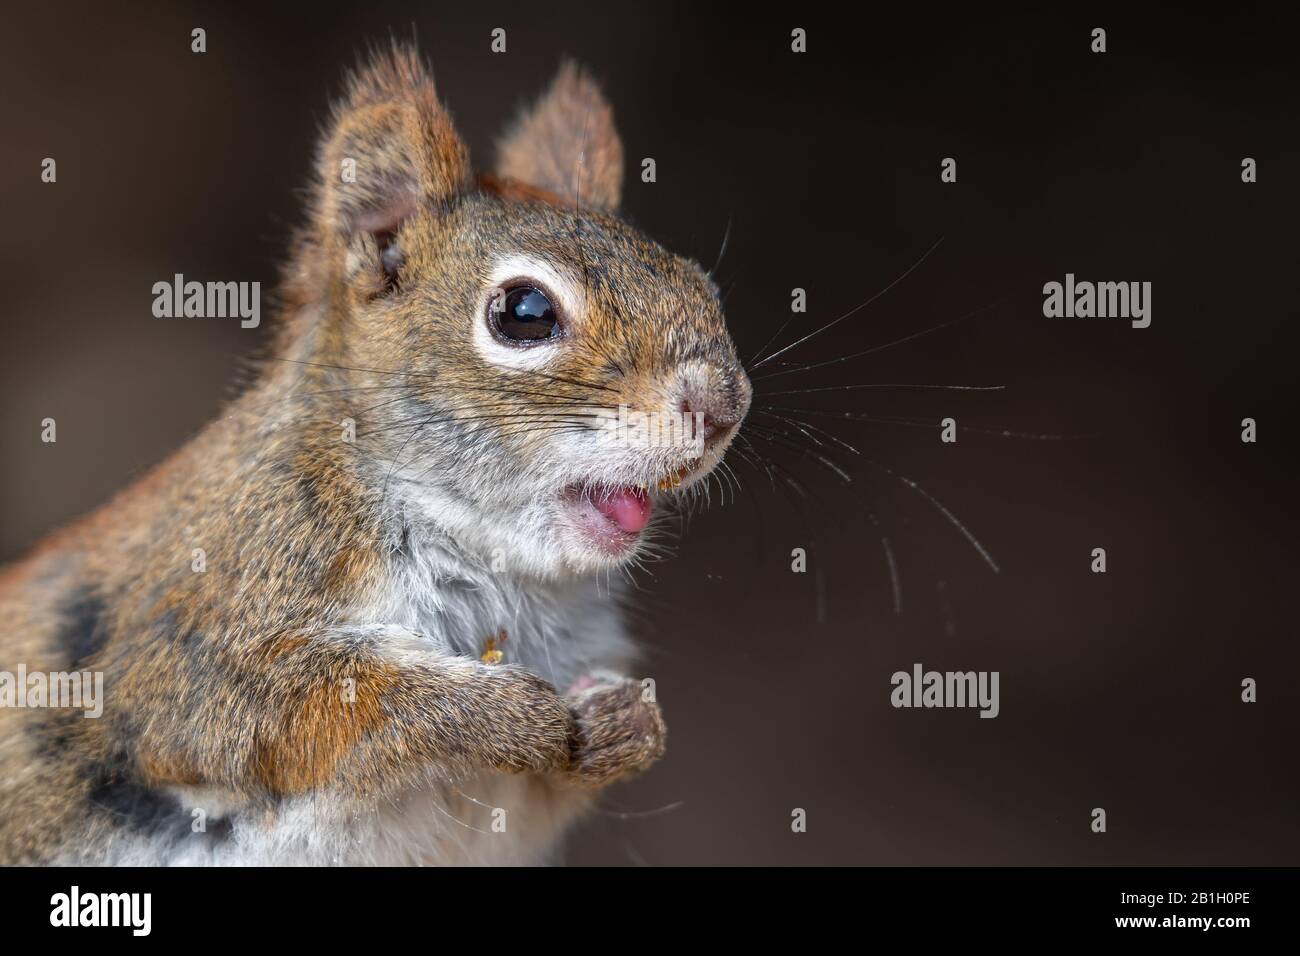 A closeup of the face os a small red squirrel. The squirrel is holding his paws together and is smiling. Stock Photo